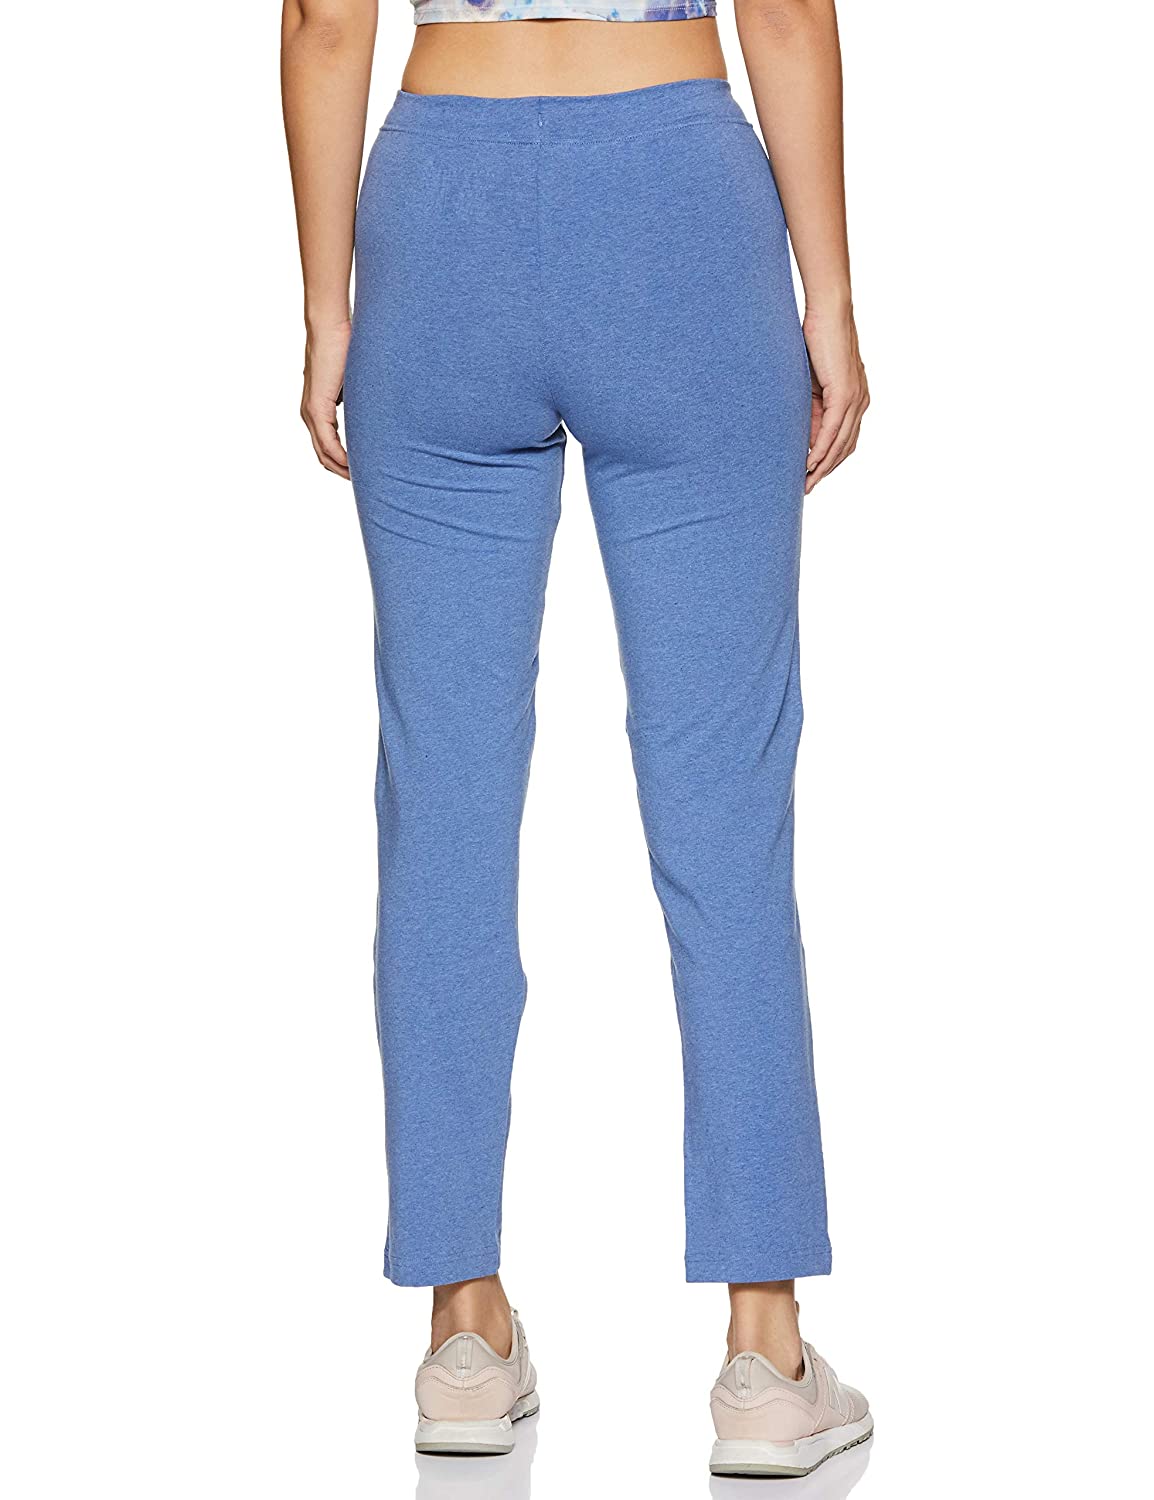 Van Heusen Athleisure Stretch Lounge Pants With Pockets